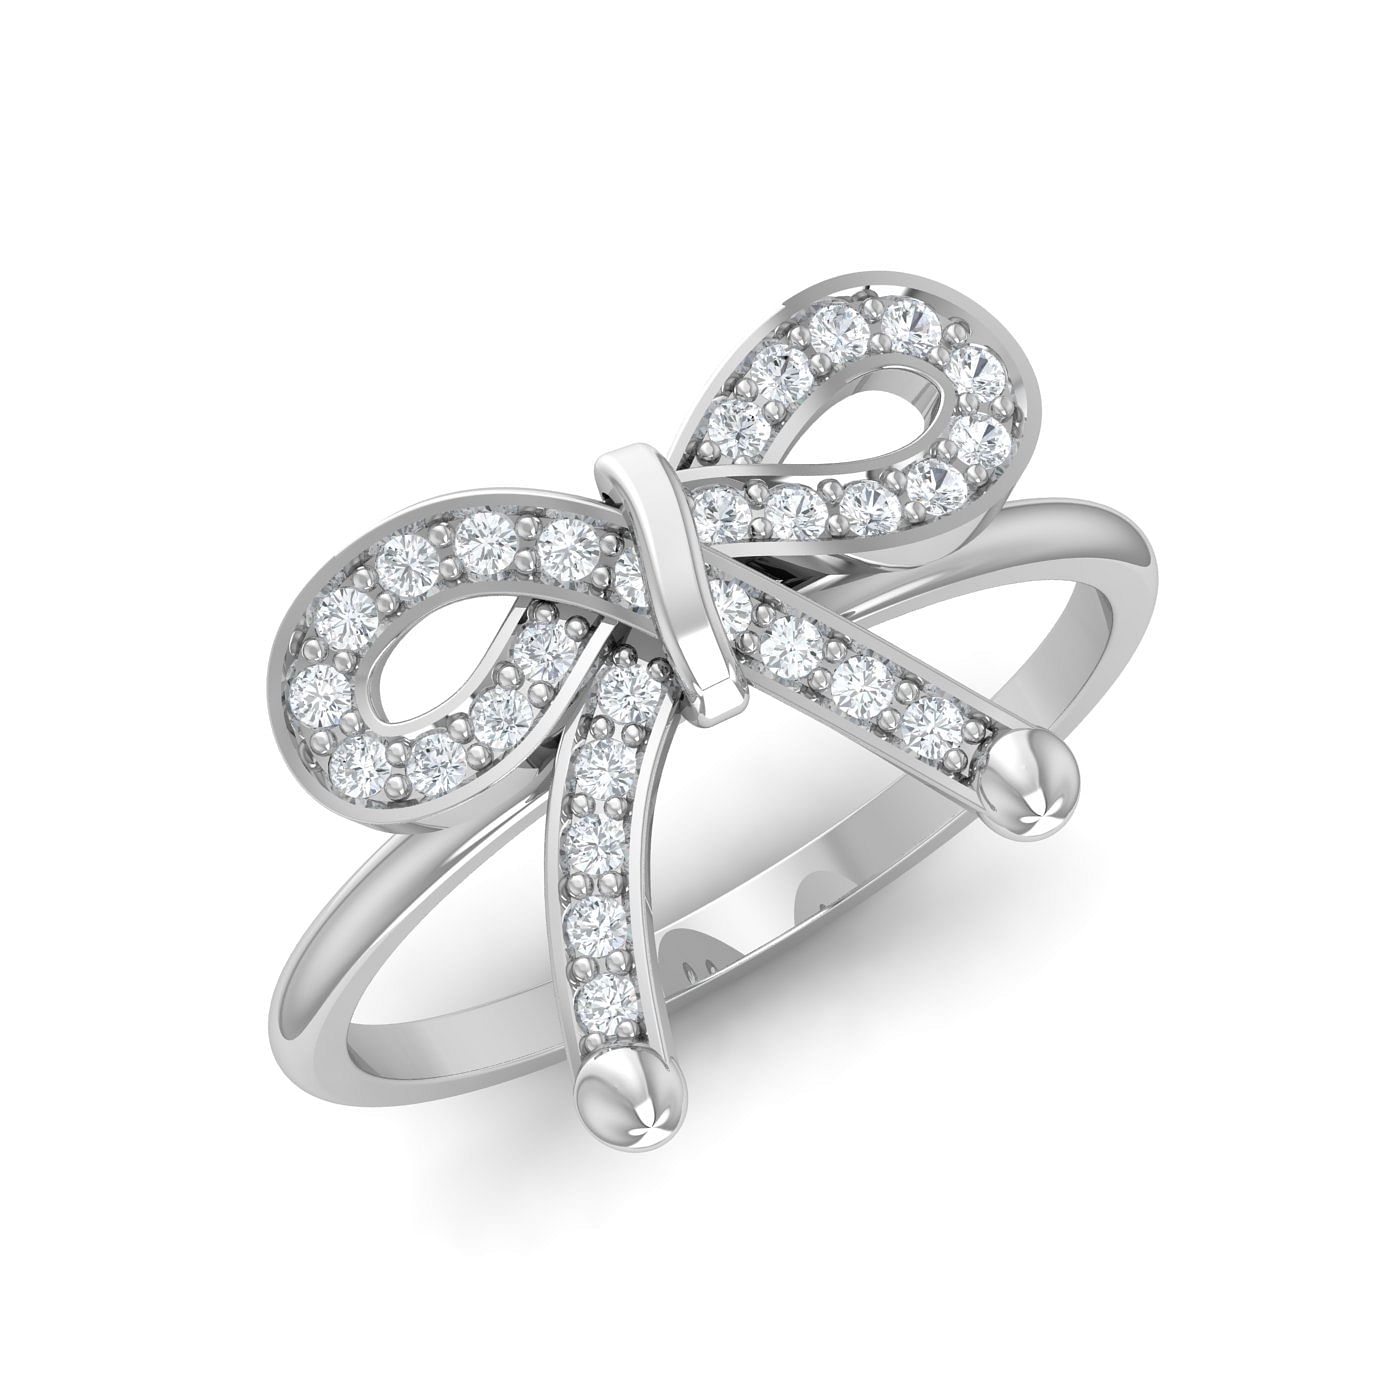 Bow Knot Diamond Ring With White Gold For Women